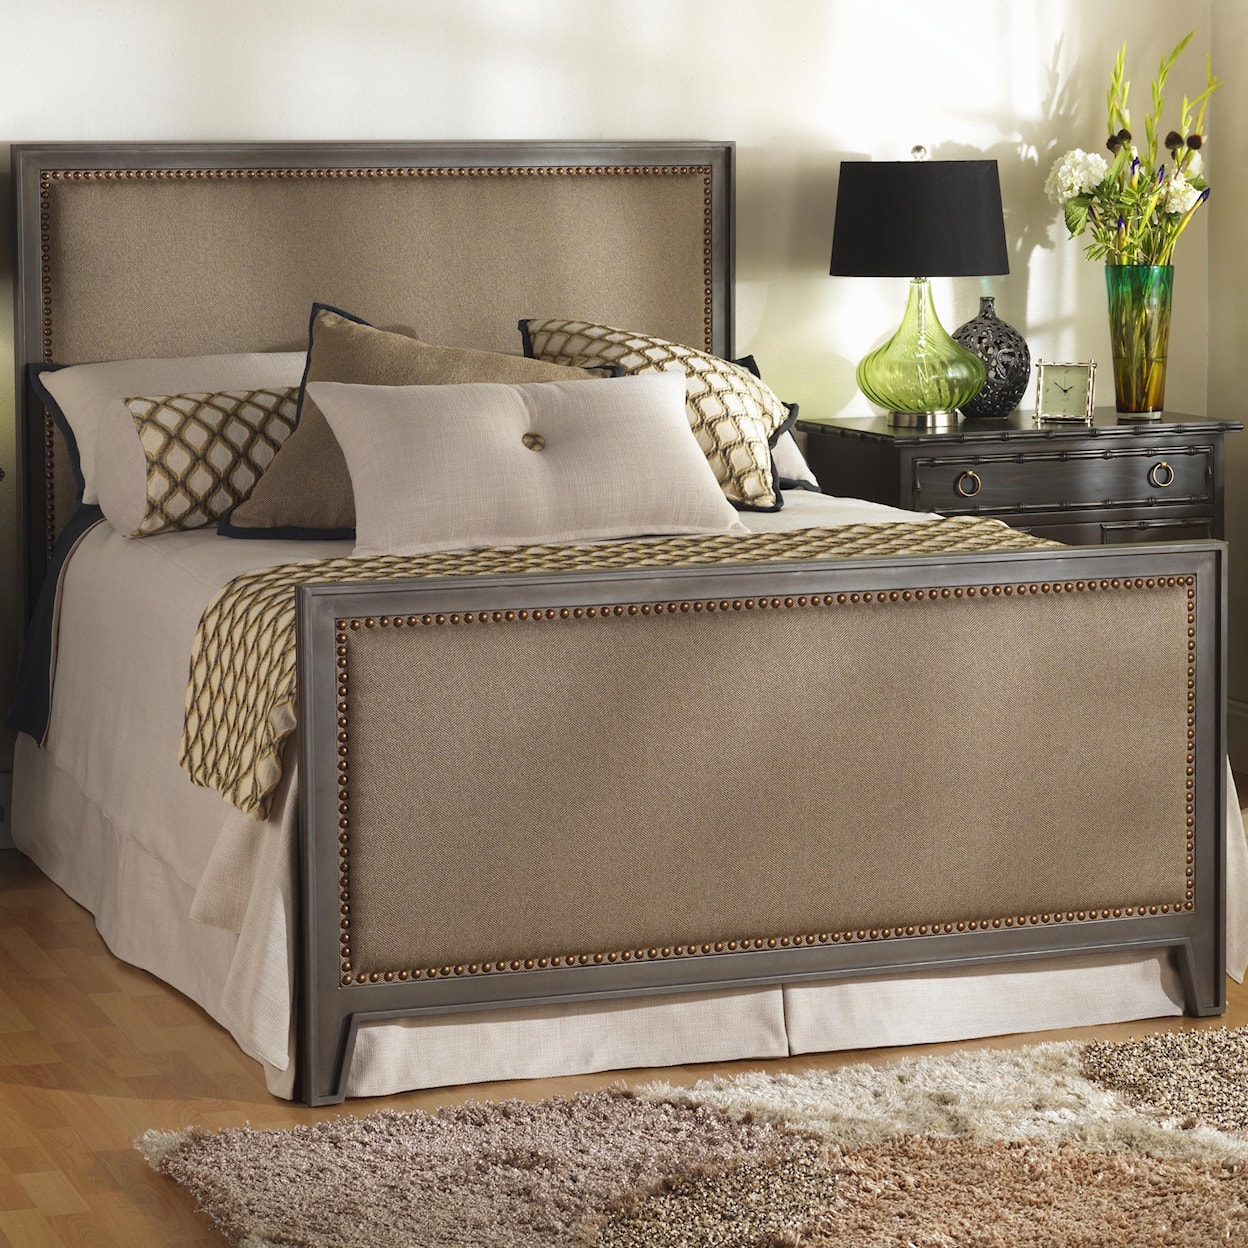 Wesley Allen Iron Beds King Avery Iron and Upholstered Bed